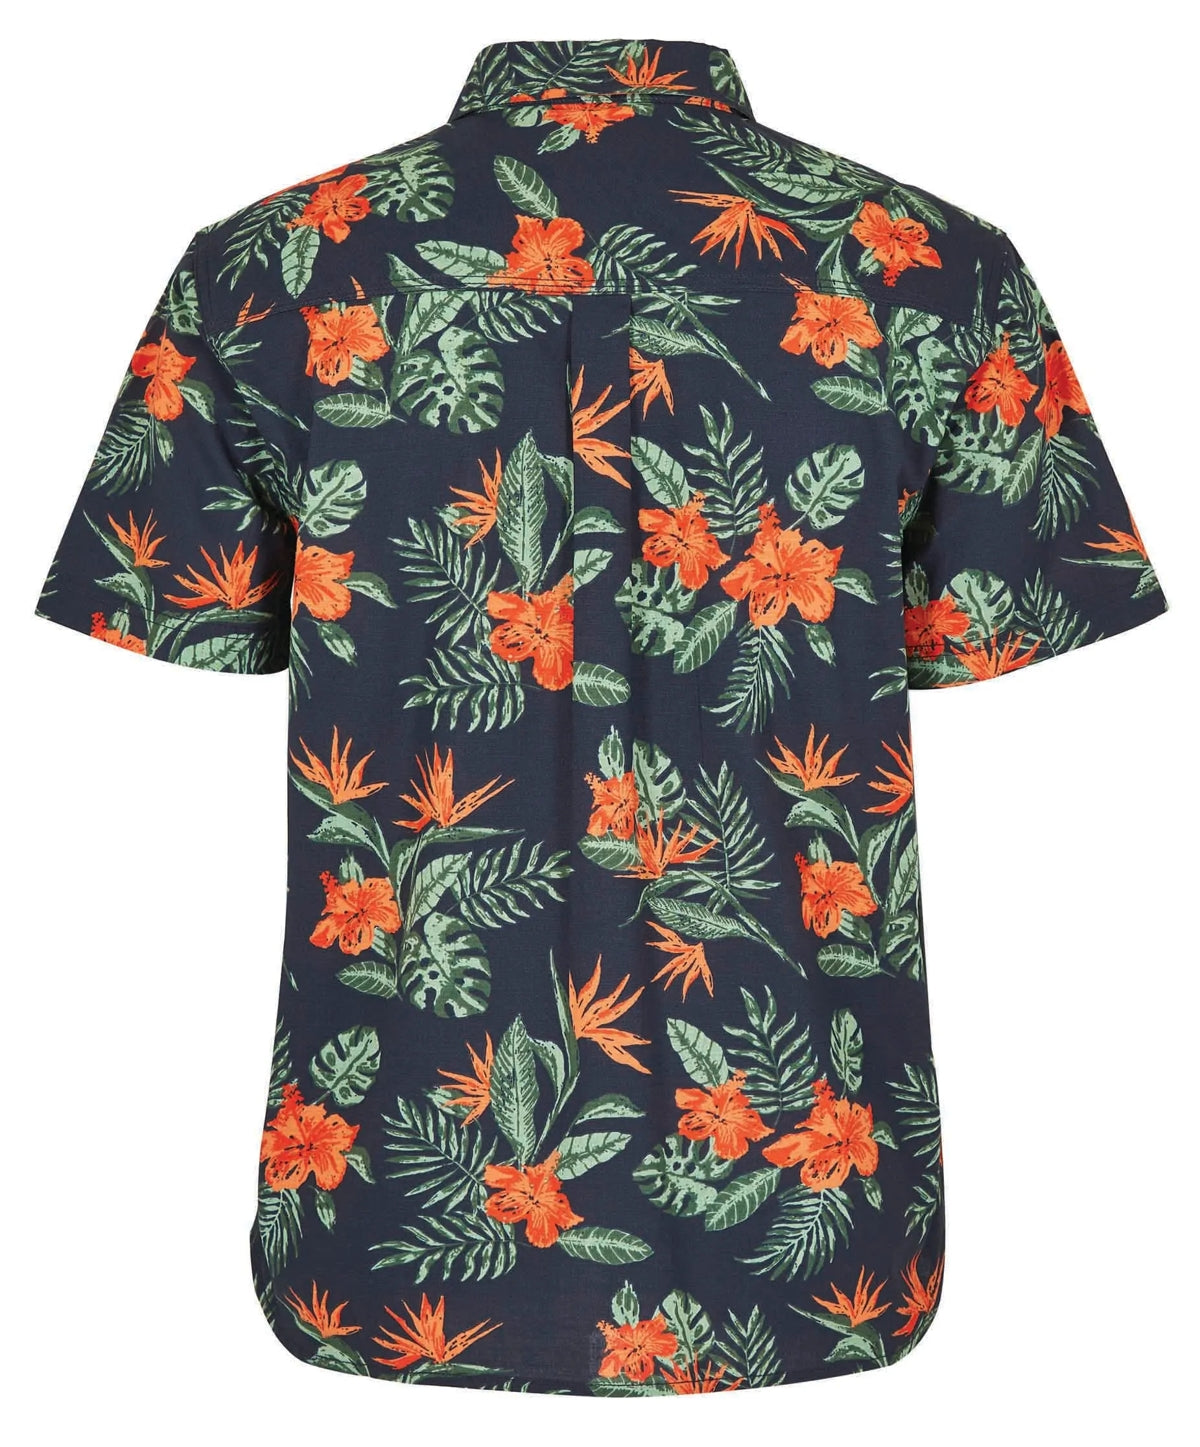 Men's short sleeve Faraway shirt from Weird Fish in Navy with a tropical floral print.